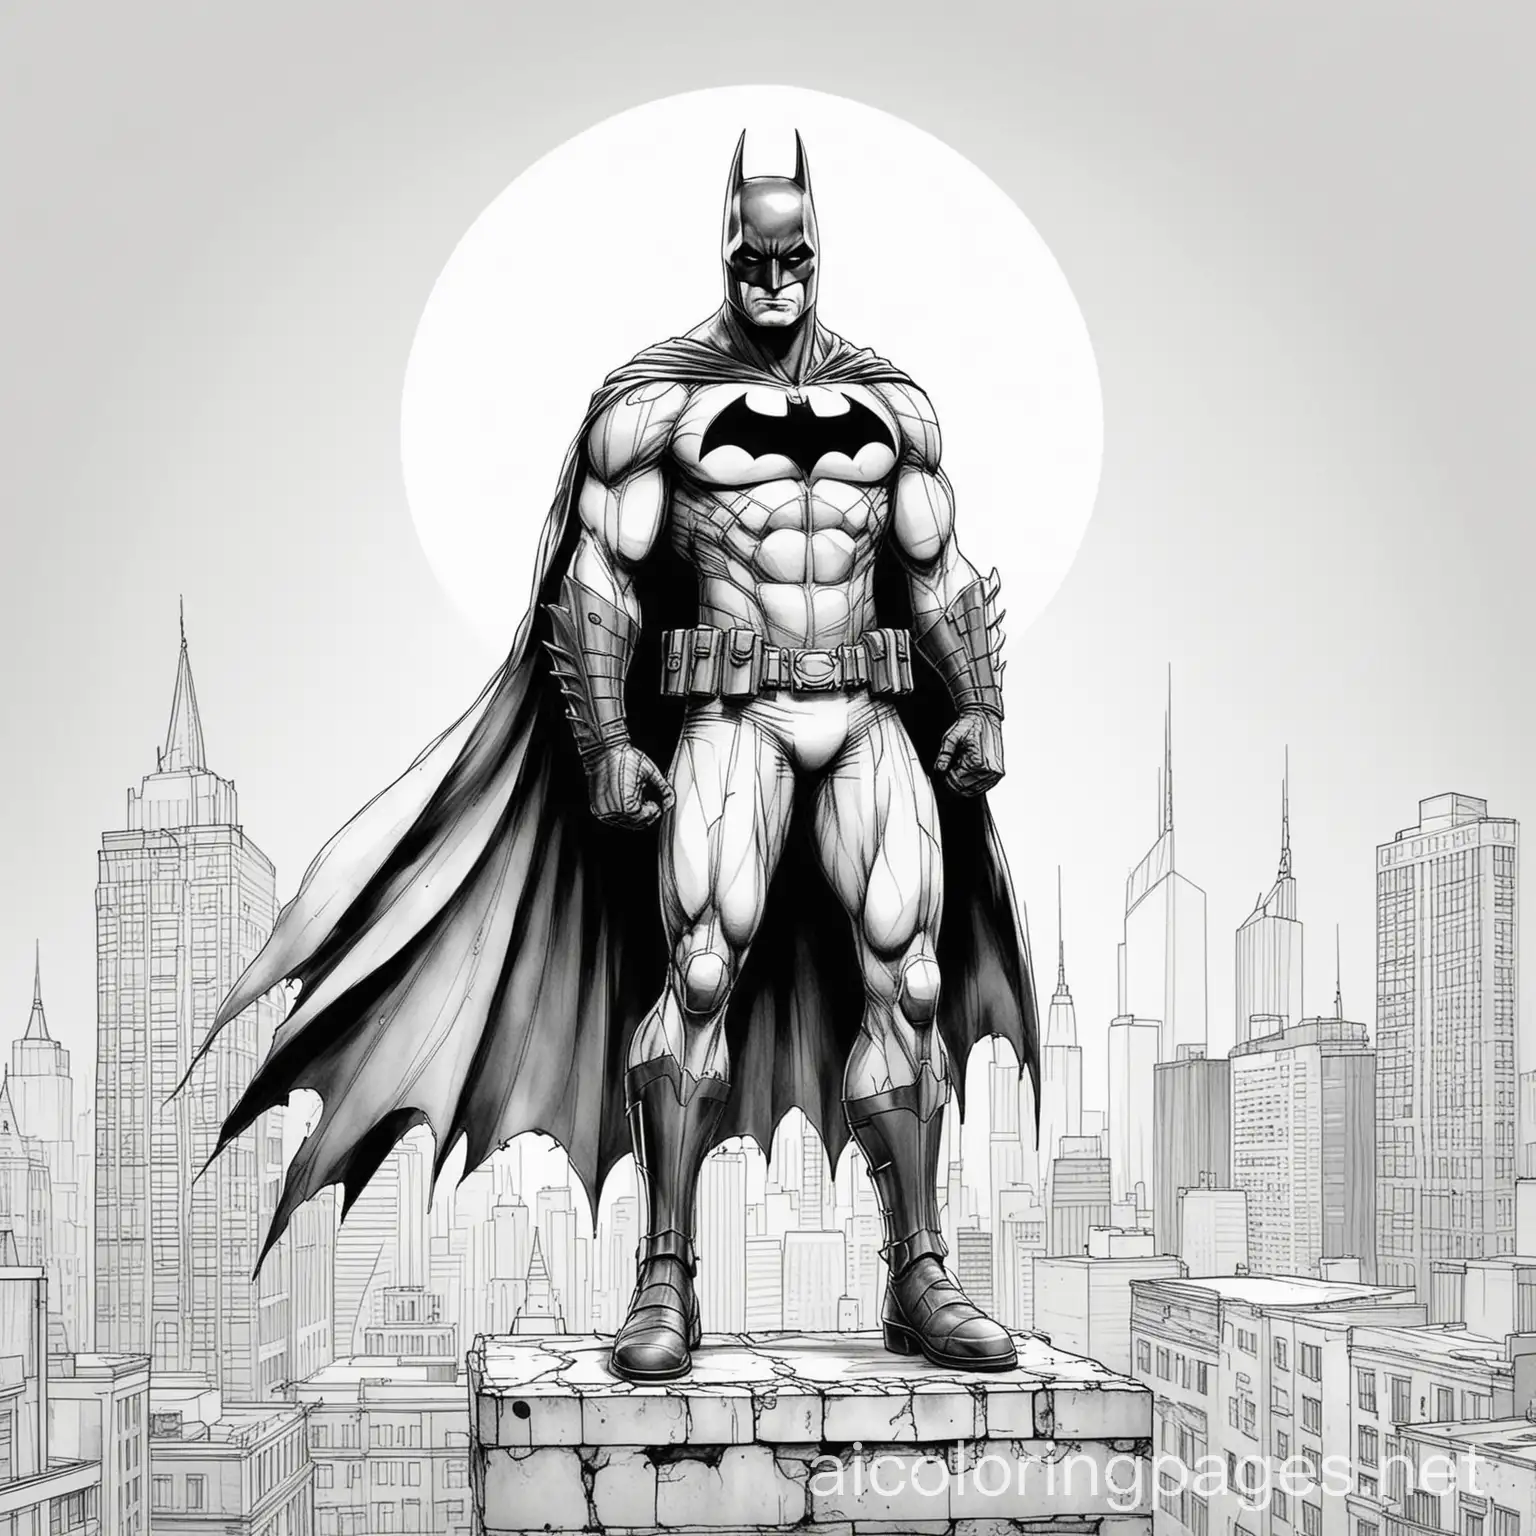 Batman standing on a building, Coloring Page, black and white, line art, white background, Simplicity, Ample White Space. The background of the coloring page is plain white to make it easy for young children to color within the lines. The outlines of all the subjects are easy to distinguish, making it simple for kids to color without too much difficulty